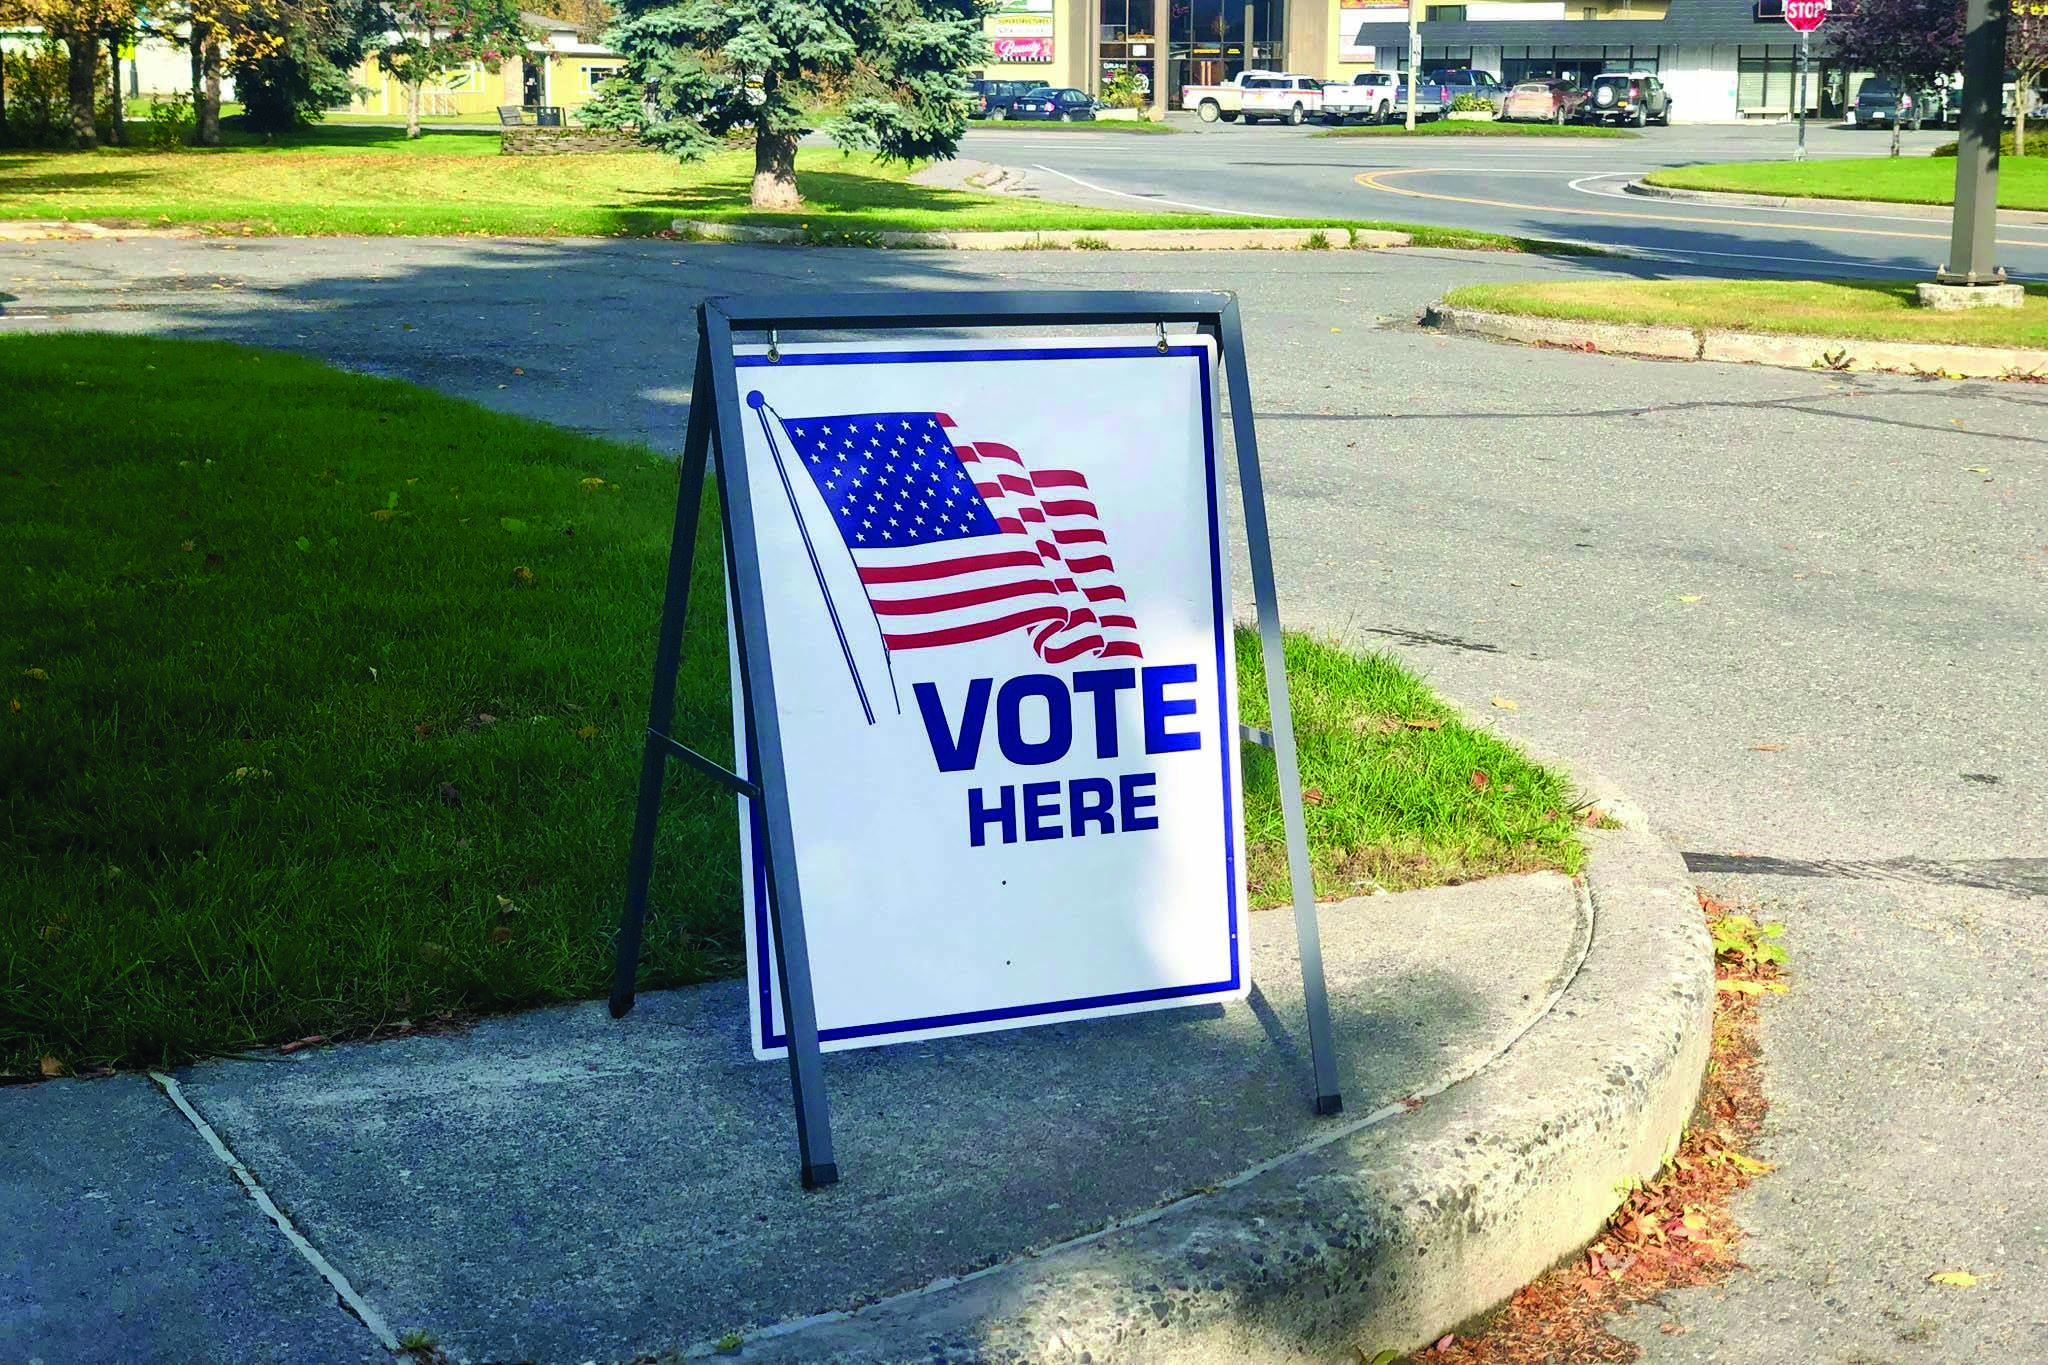 A sign directing voters to the polls stands outside Soldotna City Hall on Tuesday, Oct. 1, 2019. (Photo by Victoria Petersen/Peninsula Clarion)